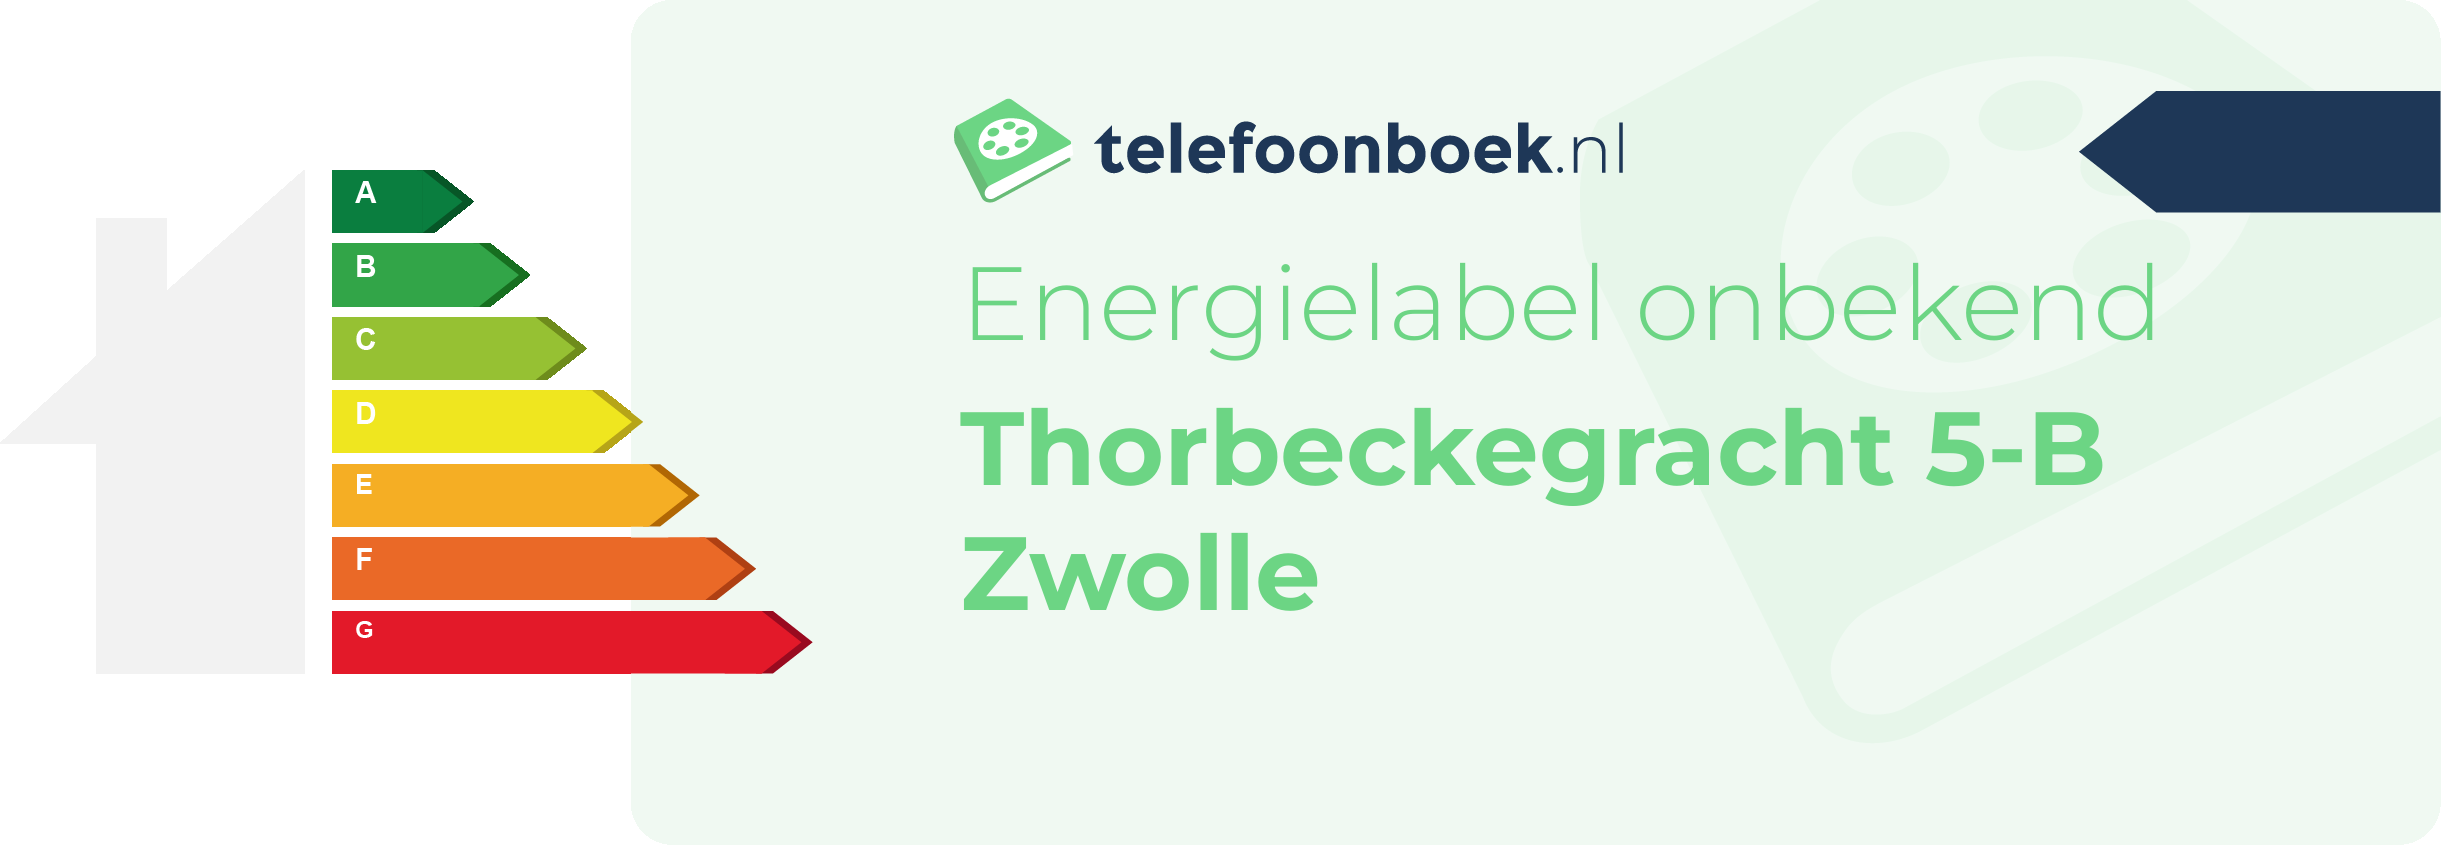 Energielabel Thorbeckegracht 5-B Zwolle